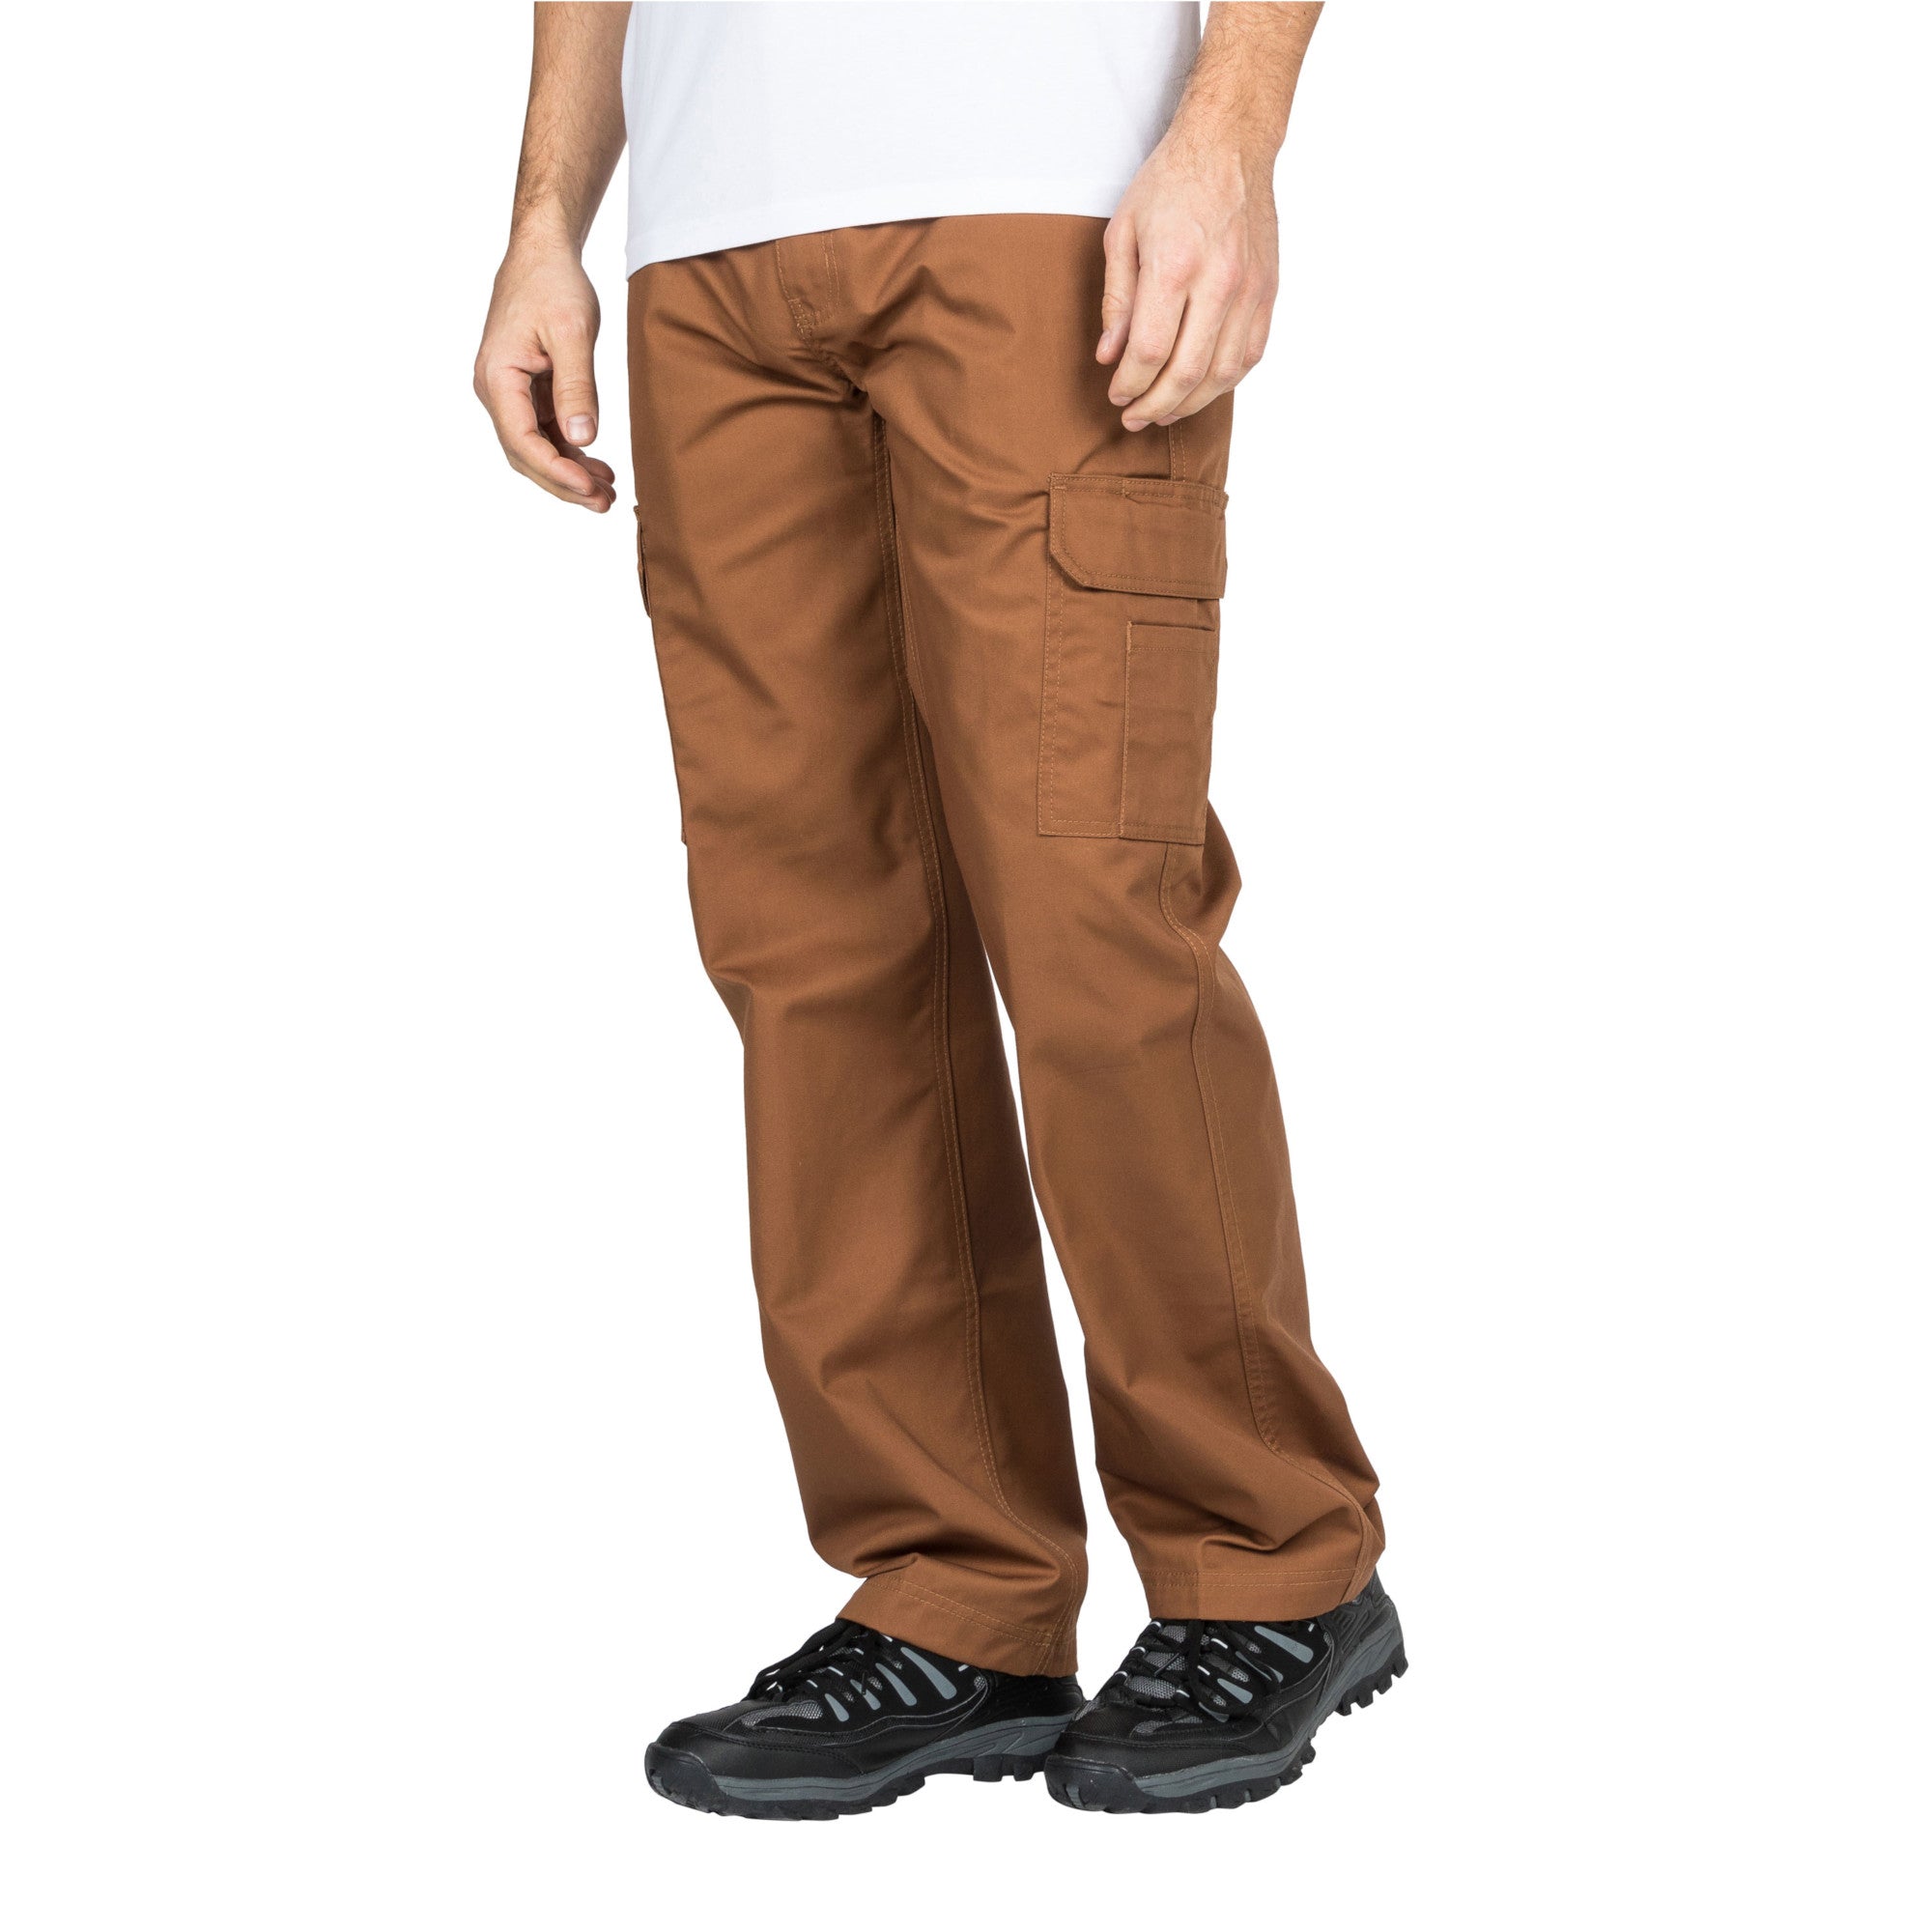 Tradesmax Pro Men's Cargo Pants with Zip-Fly and Button Closure – Giant ...